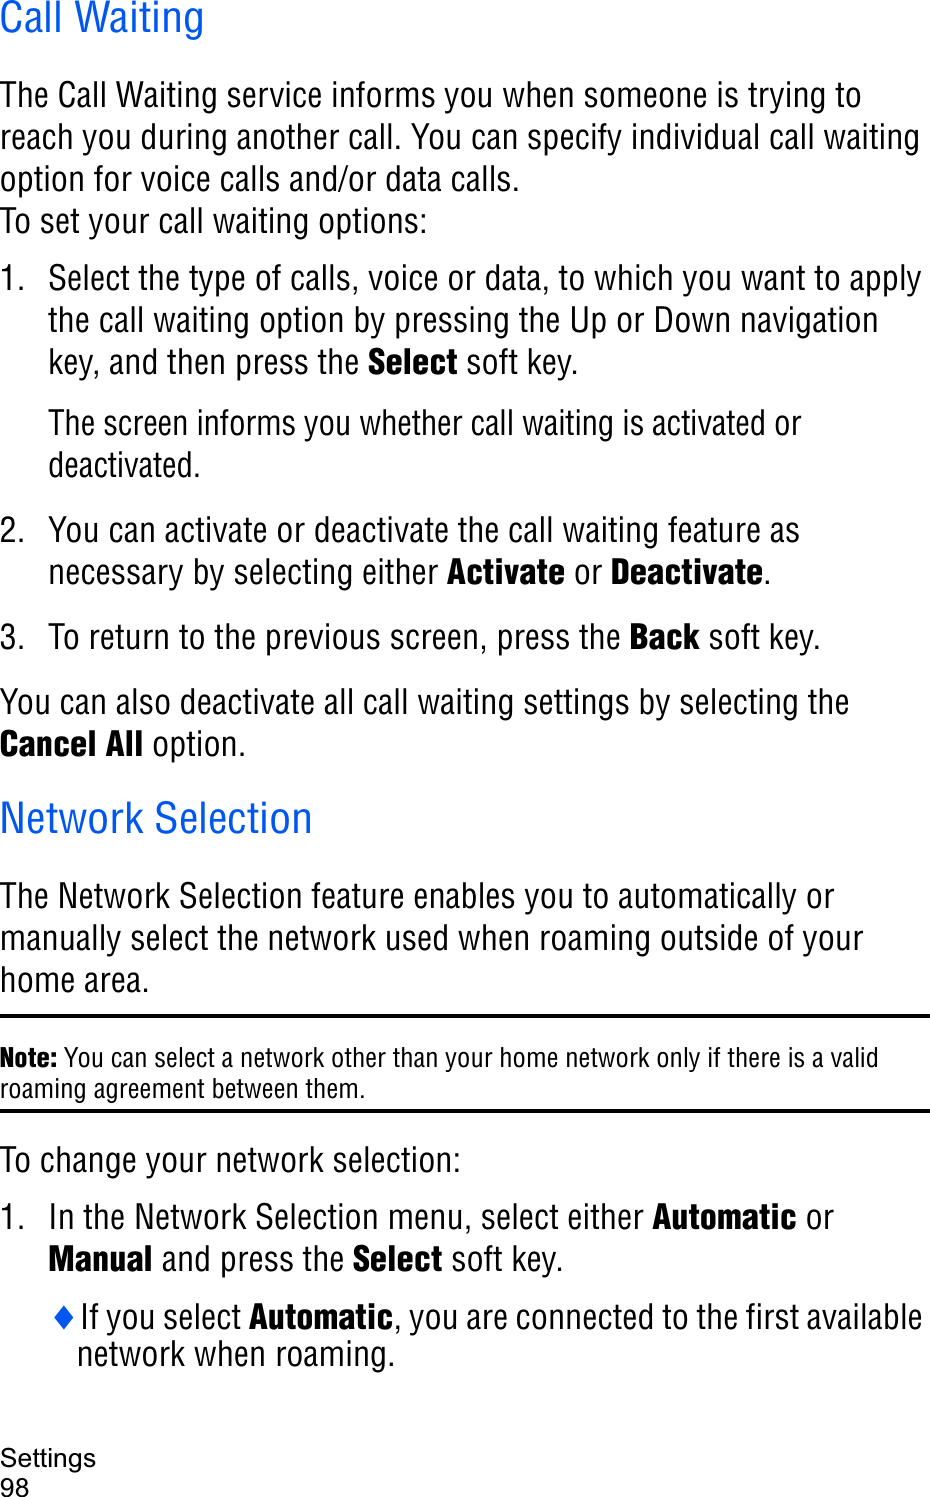 Settings98Call WaitingThe Call Waiting service informs you when someone is trying to reach you during another call. You can specify individual call waiting option for voice calls and/or data calls.To set your call waiting options:1. Select the type of calls, voice or data, to which you want to apply the call waiting option by pressing the Up or Down navigation key, and then press the Select soft key.The screen informs you whether call waiting is activated or deactivated. 2. You can activate or deactivate the call waiting feature as necessary by selecting either Activate or Deactivate.3. To return to the previous screen, press the Back soft key.You can also deactivate all call waiting settings by selecting the Cancel All option.Network SelectionThe Network Selection feature enables you to automatically or manually select the network used when roaming outside of your home area.Note: You can select a network other than your home network only if there is a valid roaming agreement between them.To change your network selection:1. In the Network Selection menu, select either Automatic or Manual and press the Select soft key.iIf you select Automatic, you are connected to the first available network when roaming.